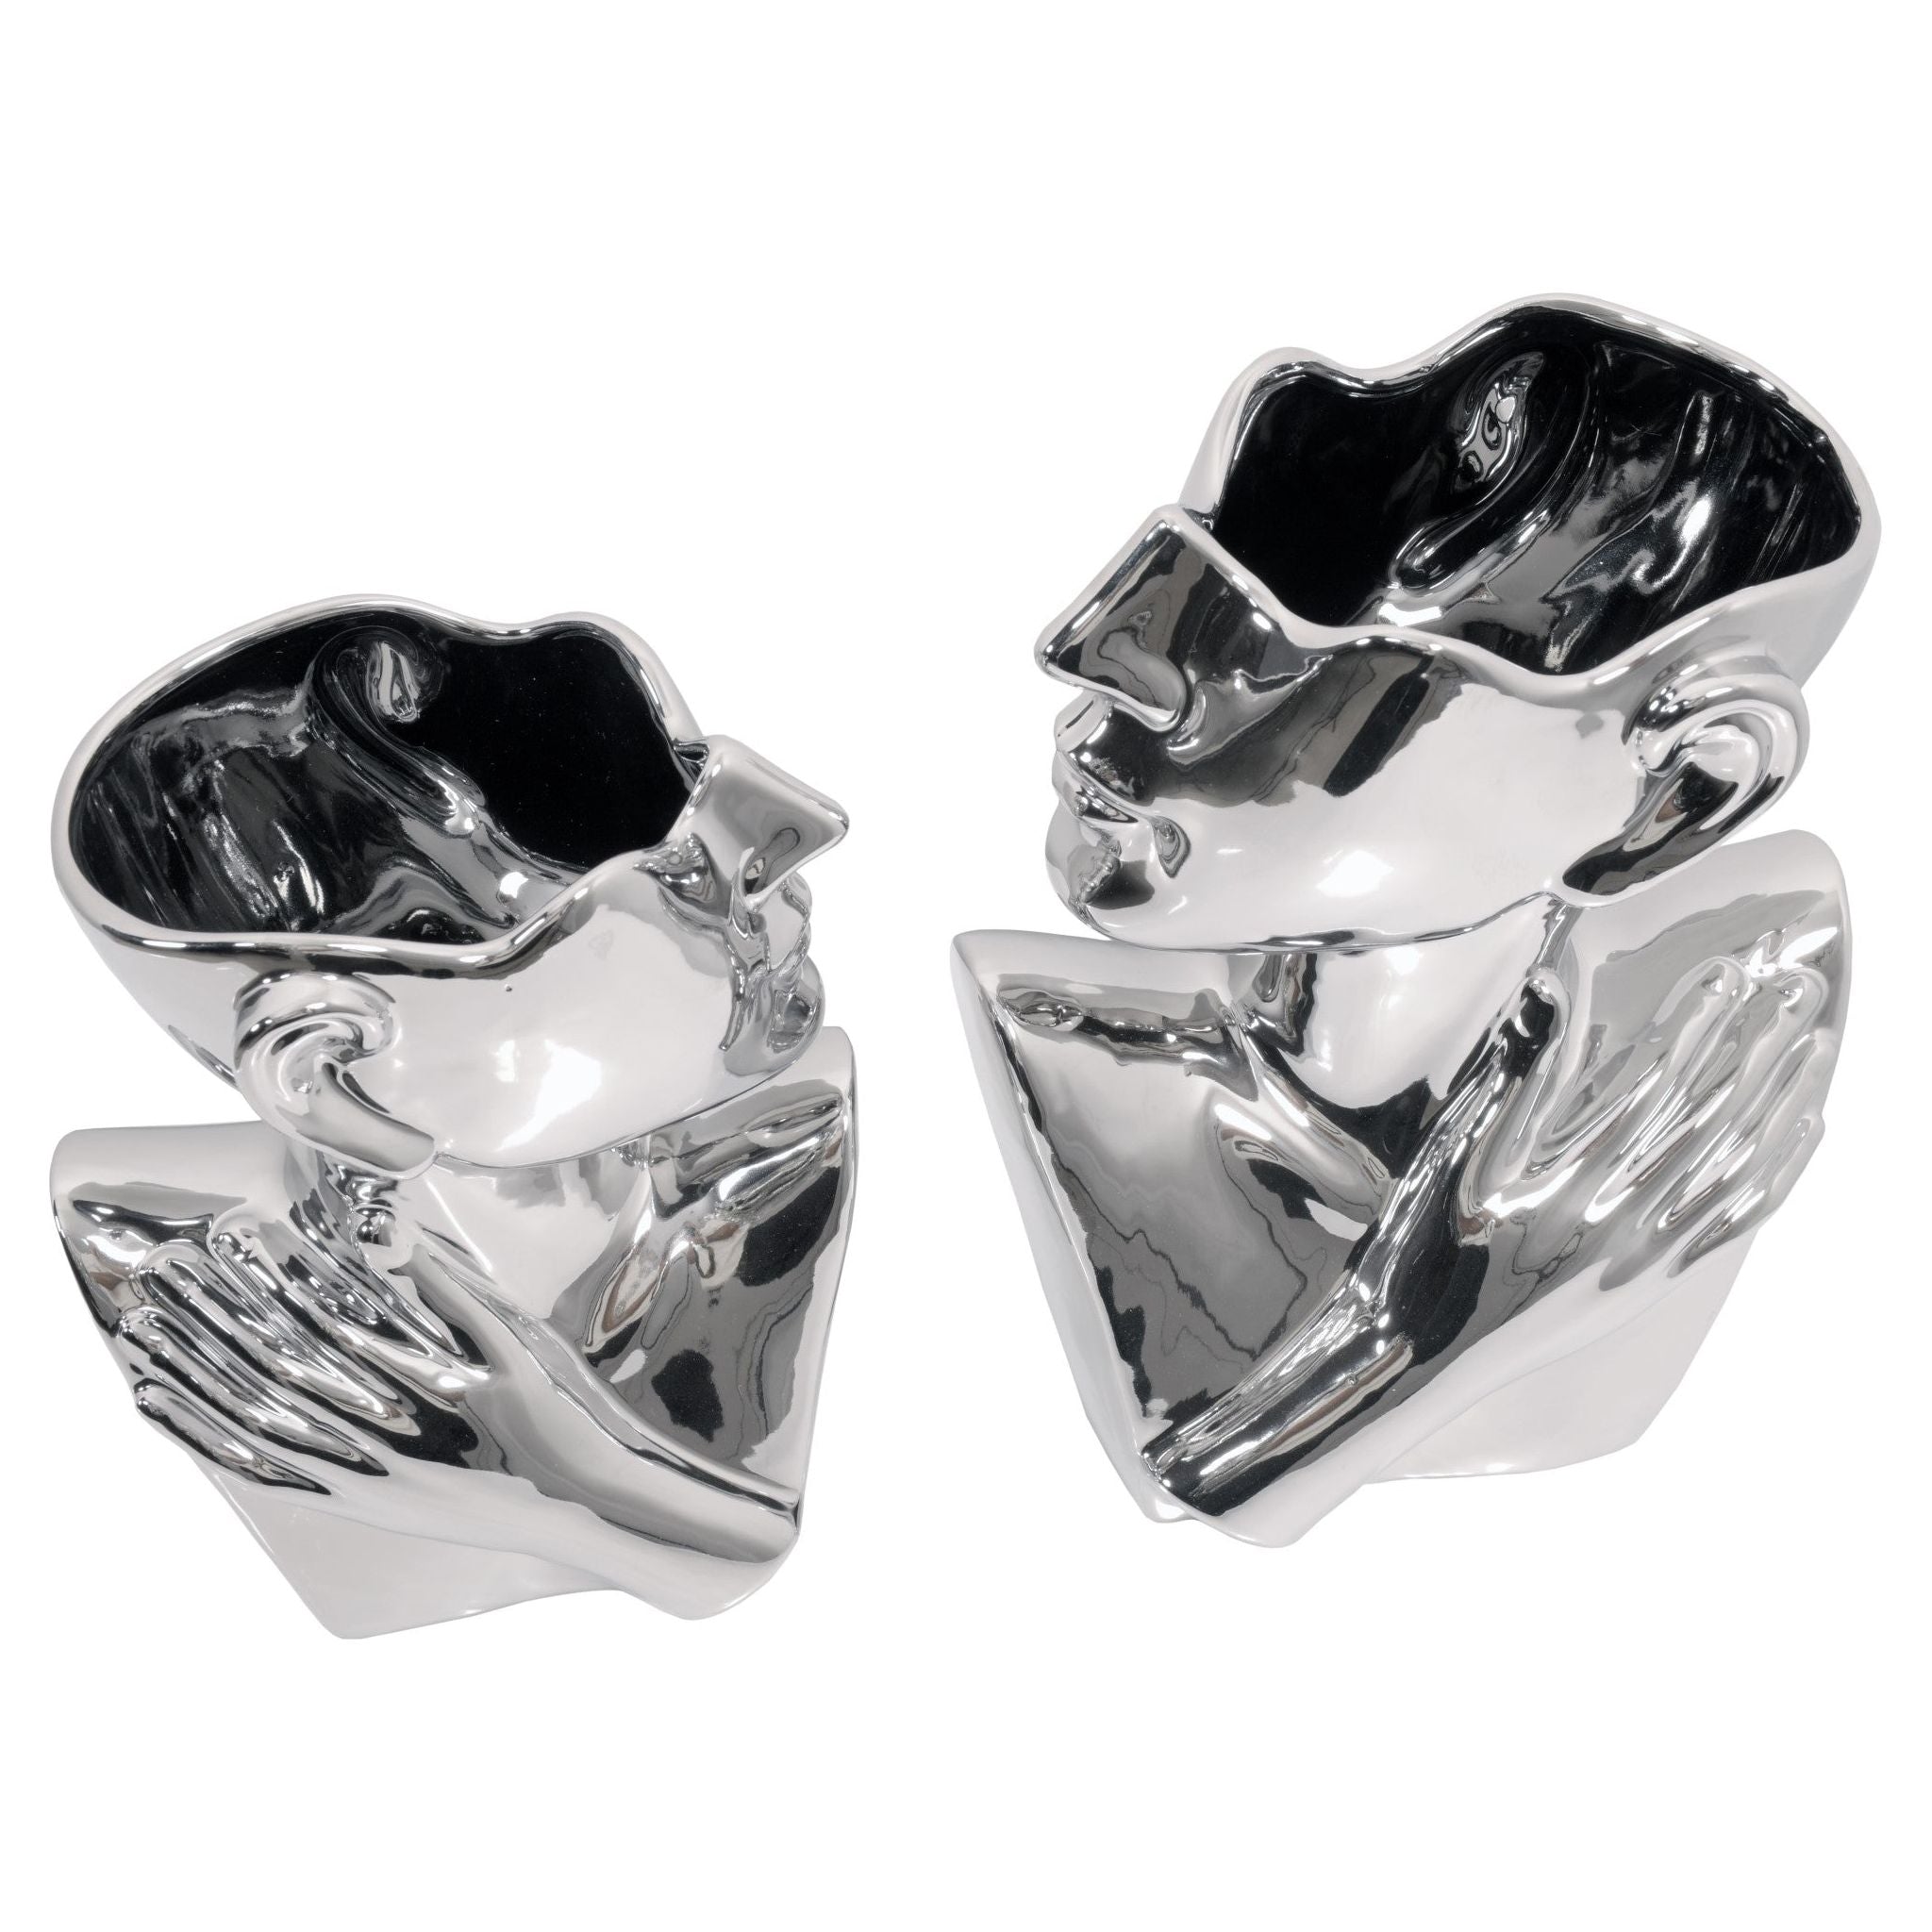 AFD Home  Abstract Torso Vases Silver Set of 2 - New Star Living